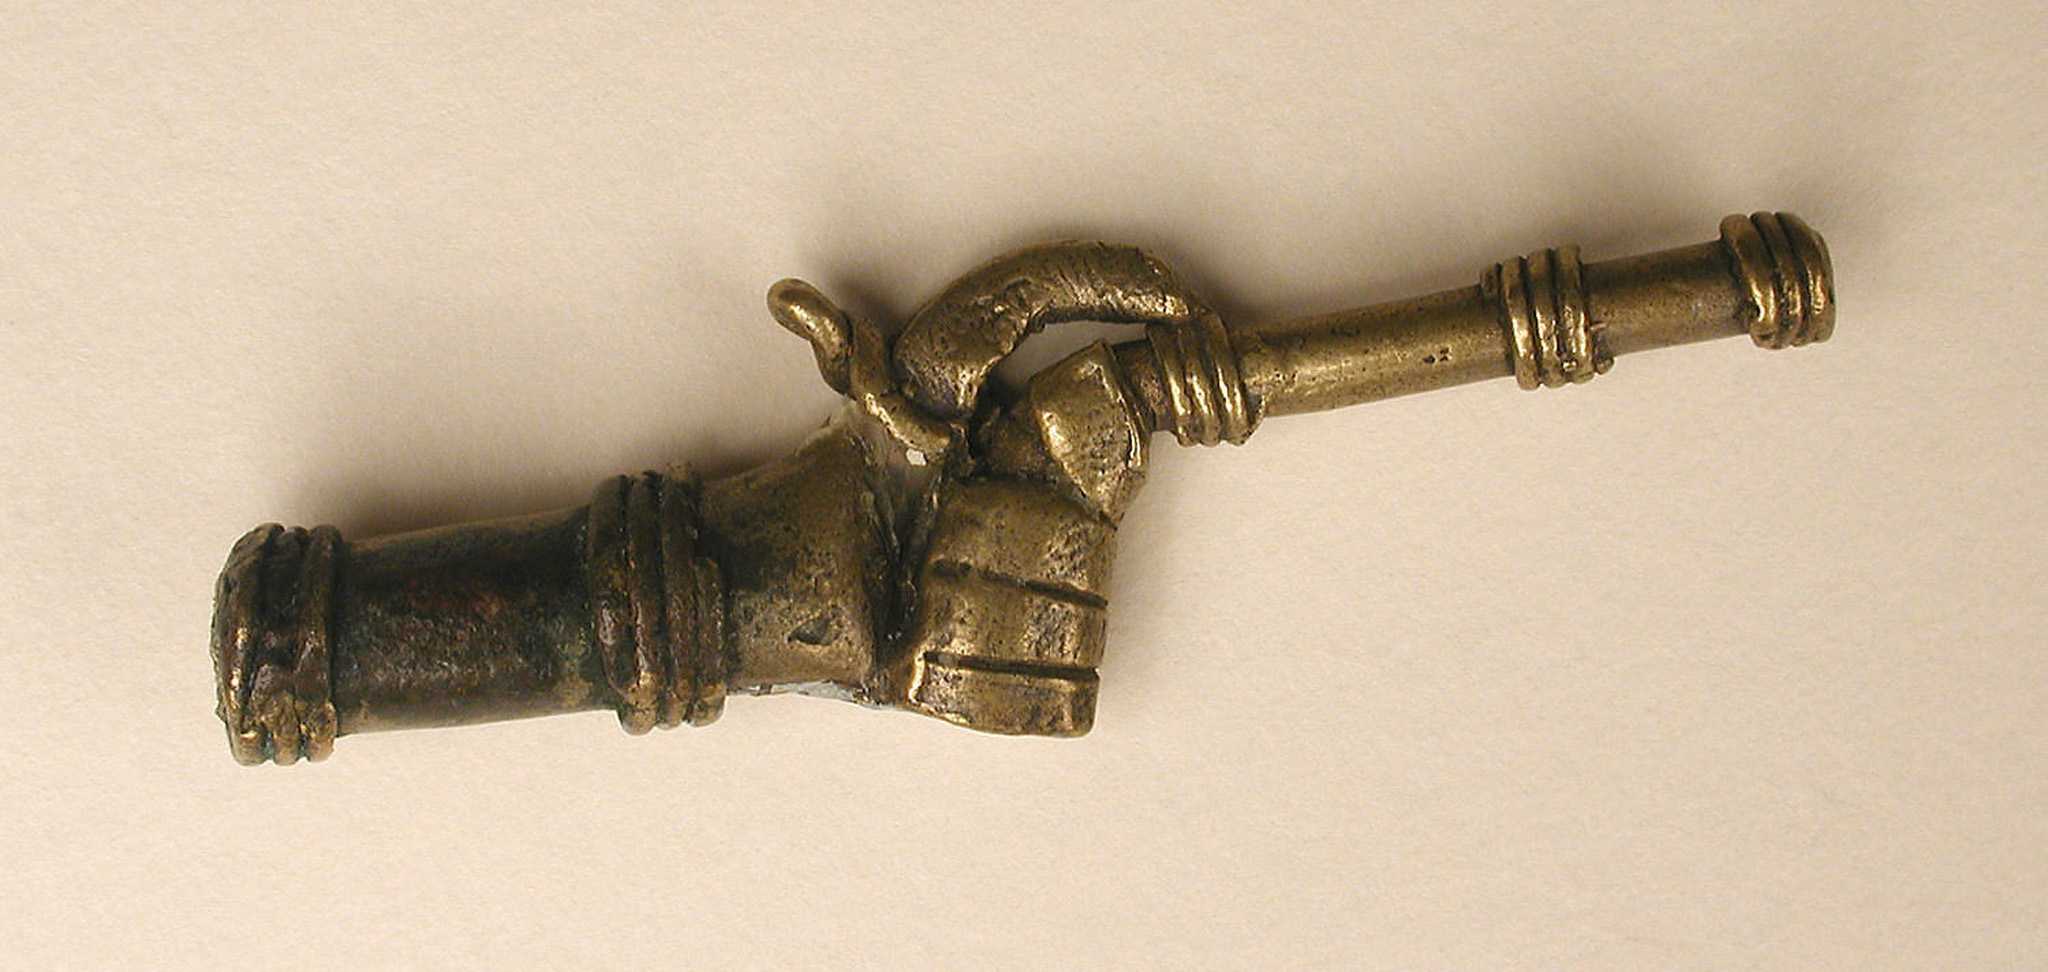 An gold Akan weight in the shape of a hand holding a rifle is displayed against a cream background.